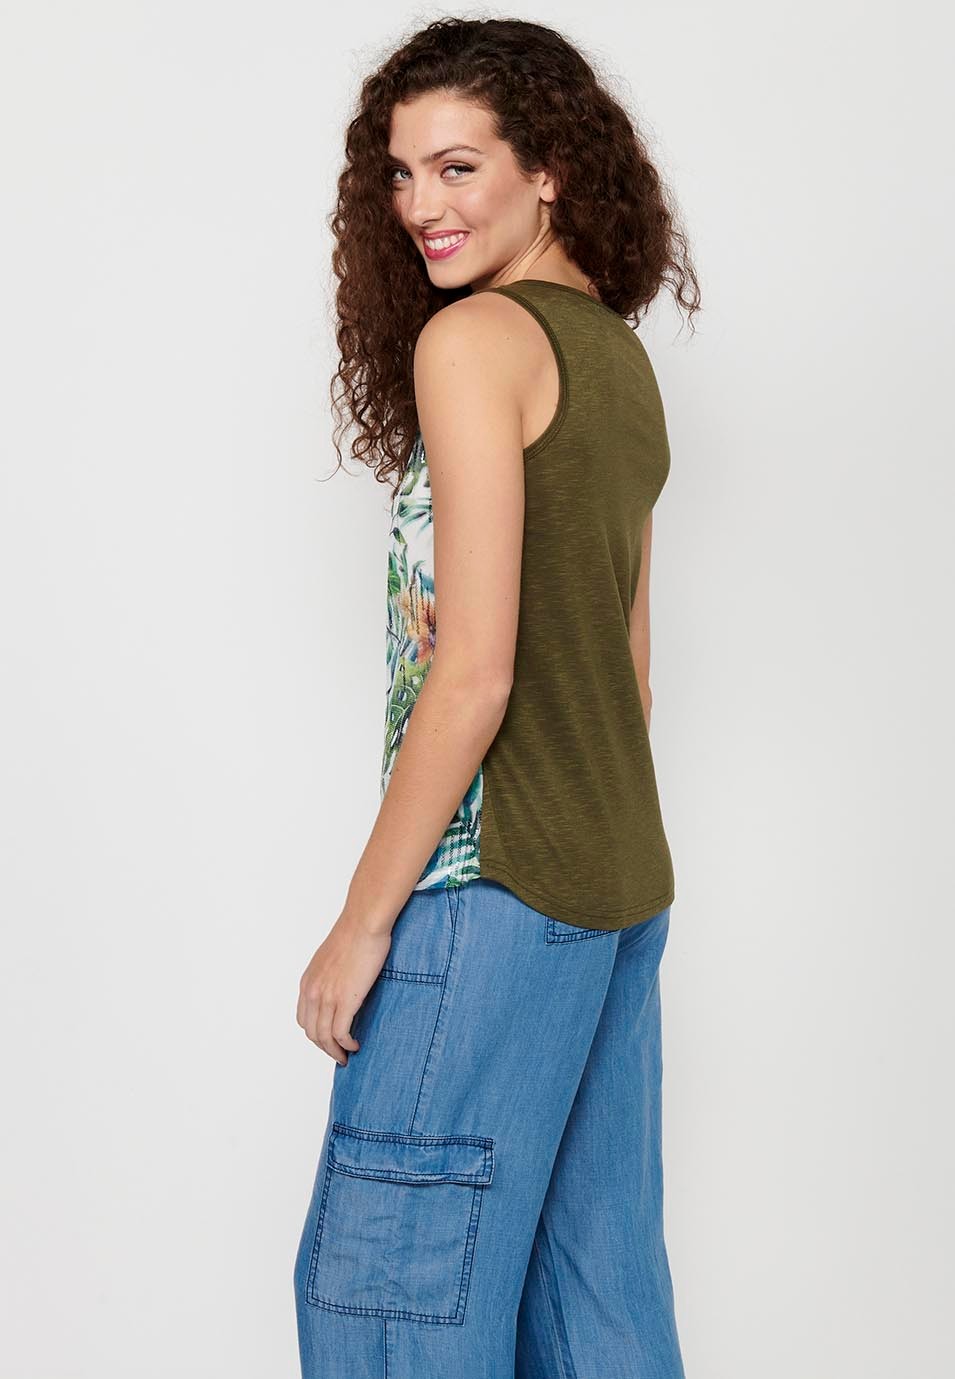 Khaki Tank Top with Round Neckline and Floral Print and Front Sequins for Women 7